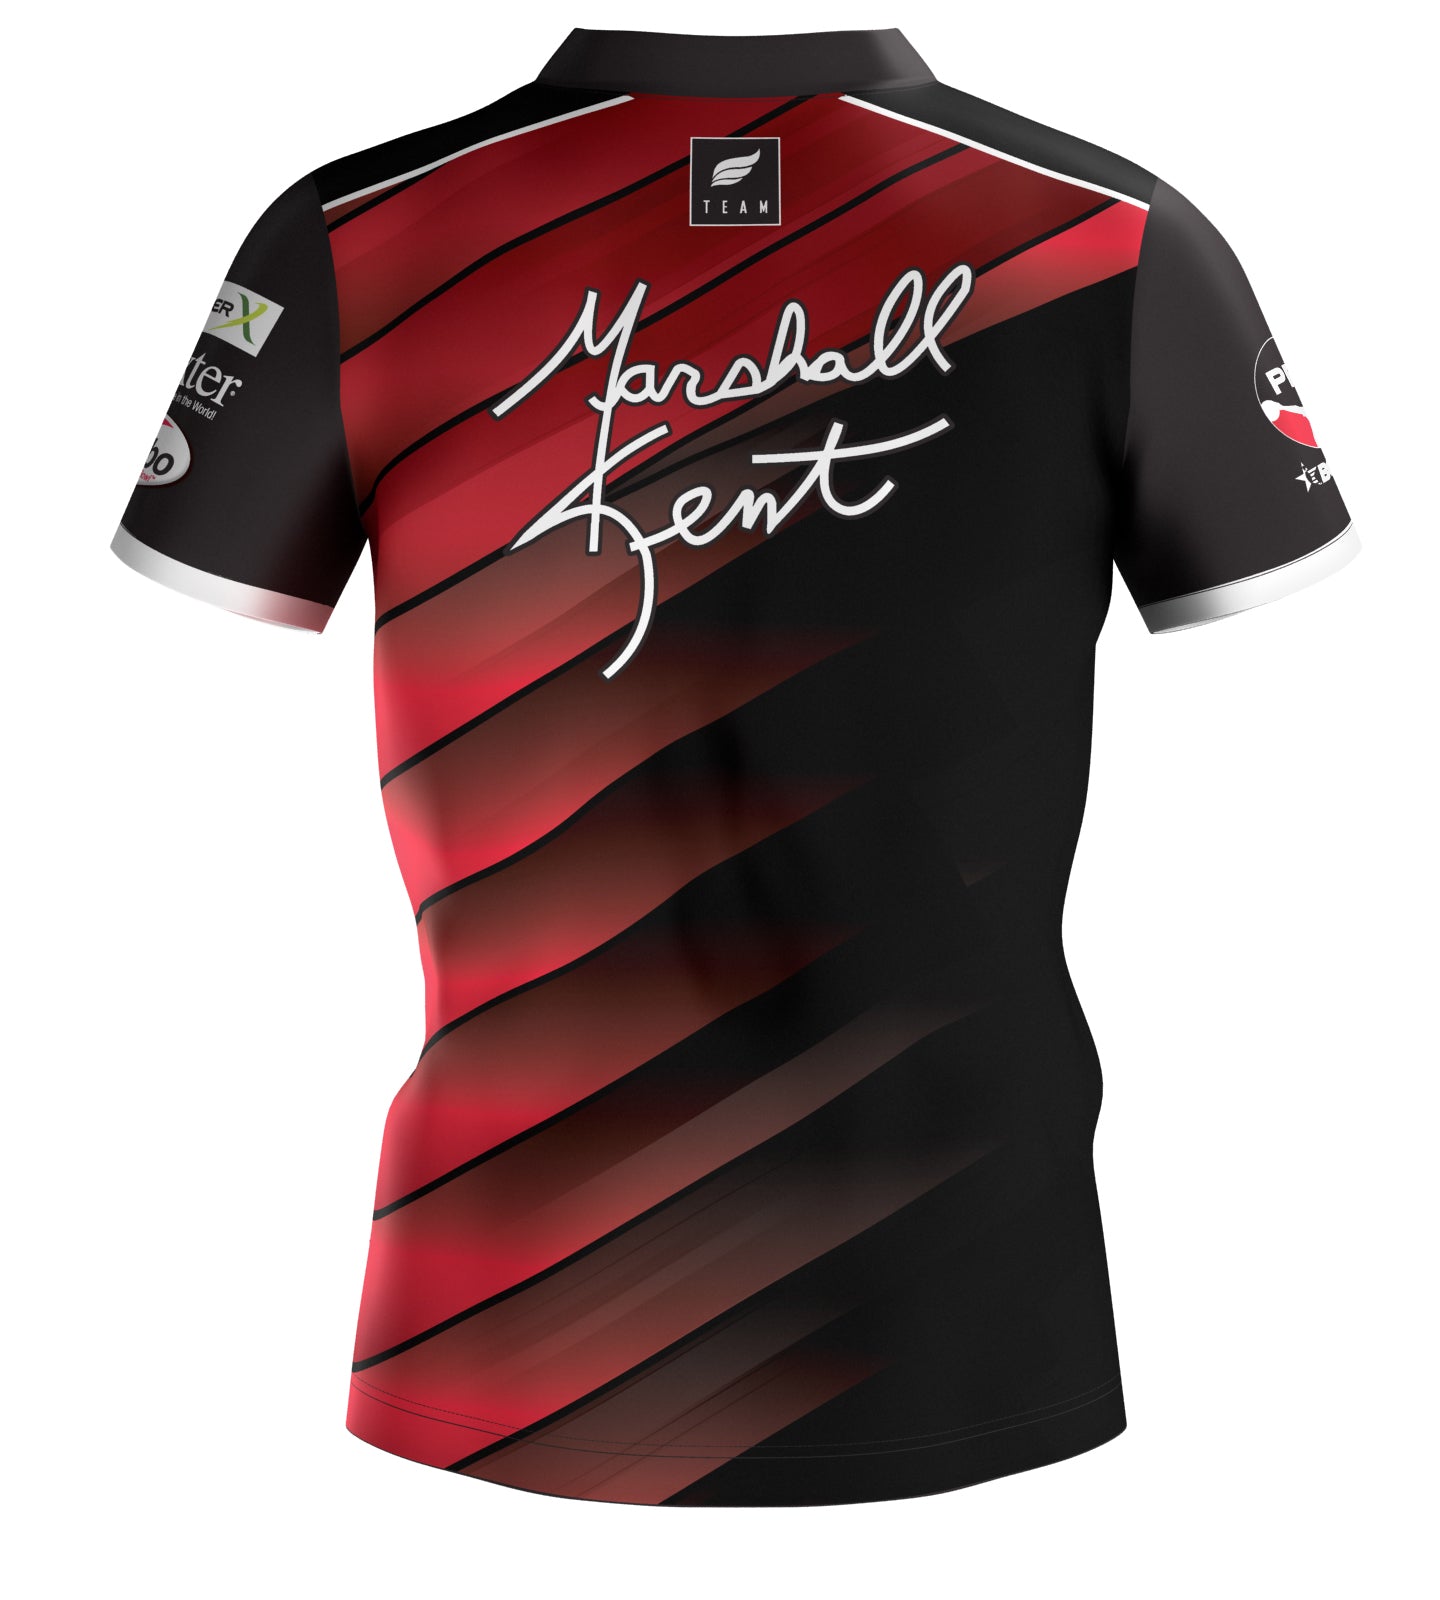 MARSHALL KENT 2023 - ABSTRACT GRID BLACK RED